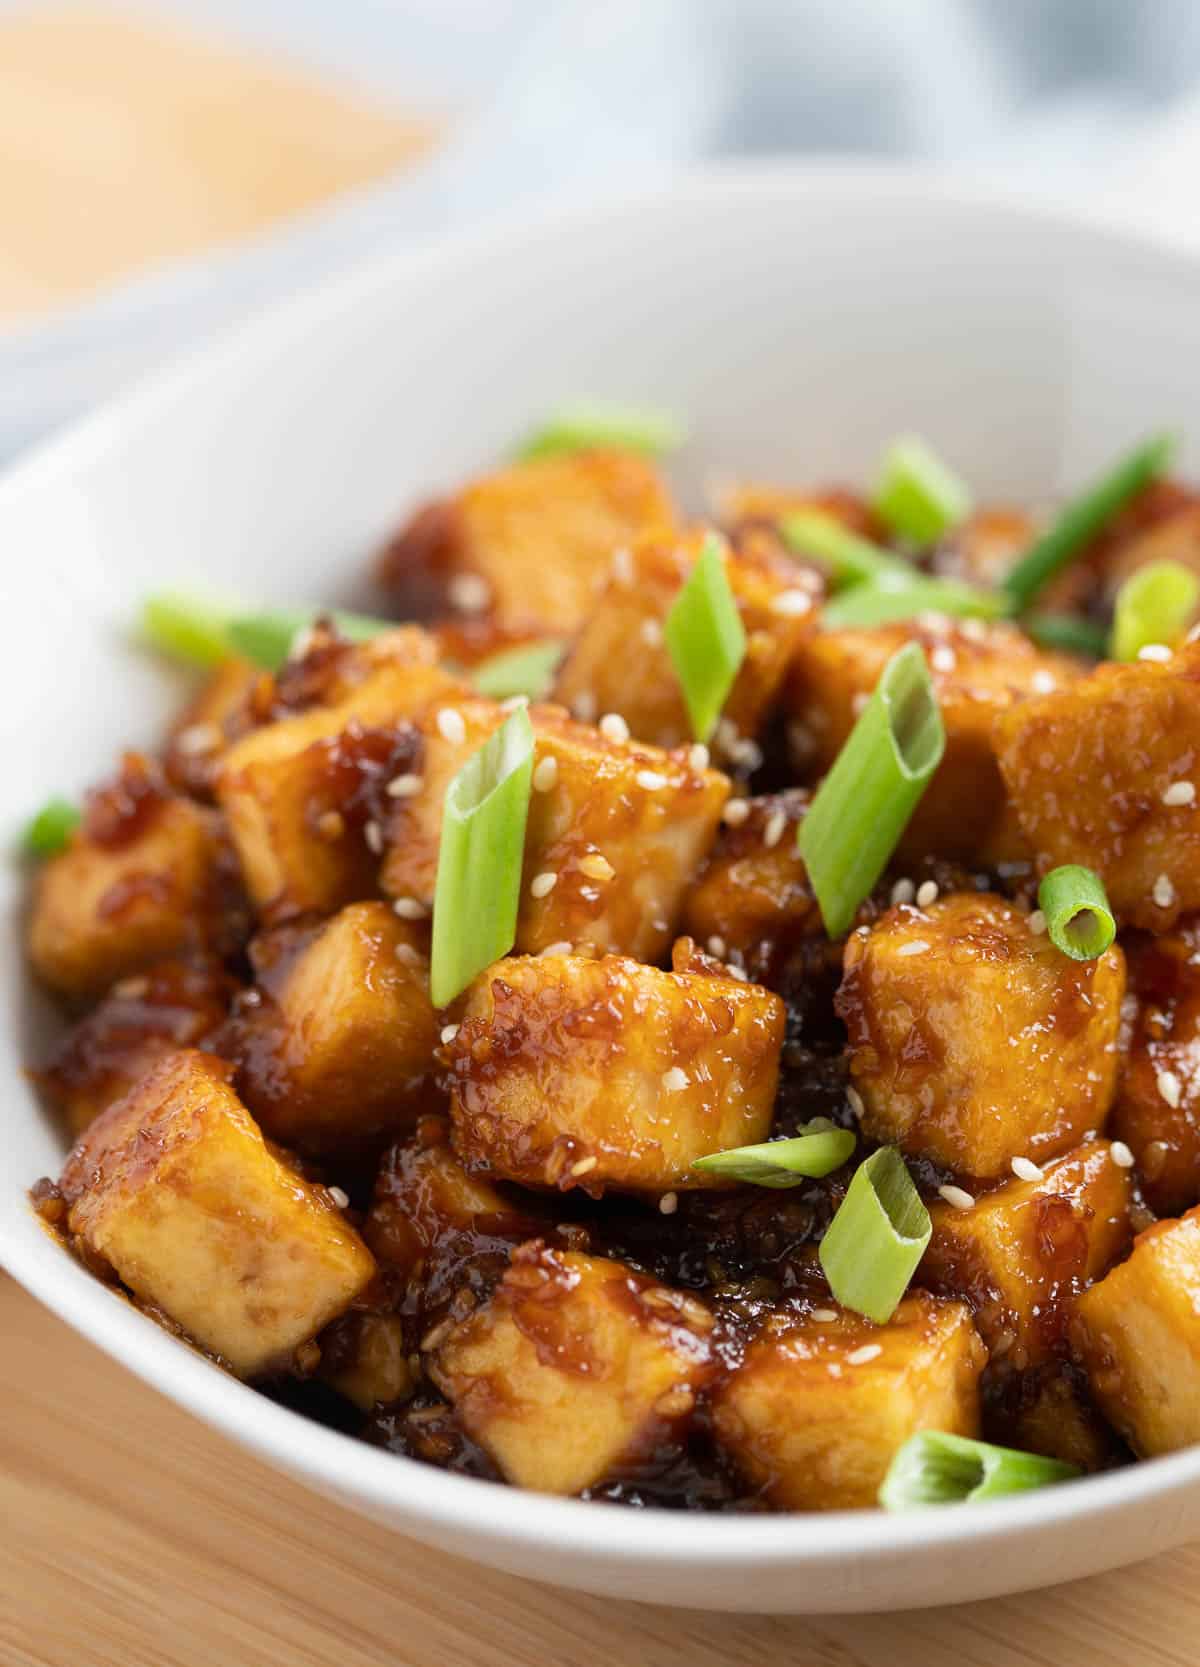 Crispy tofu coated in teriyaki sauce and topped with scallions and sesame seeds.